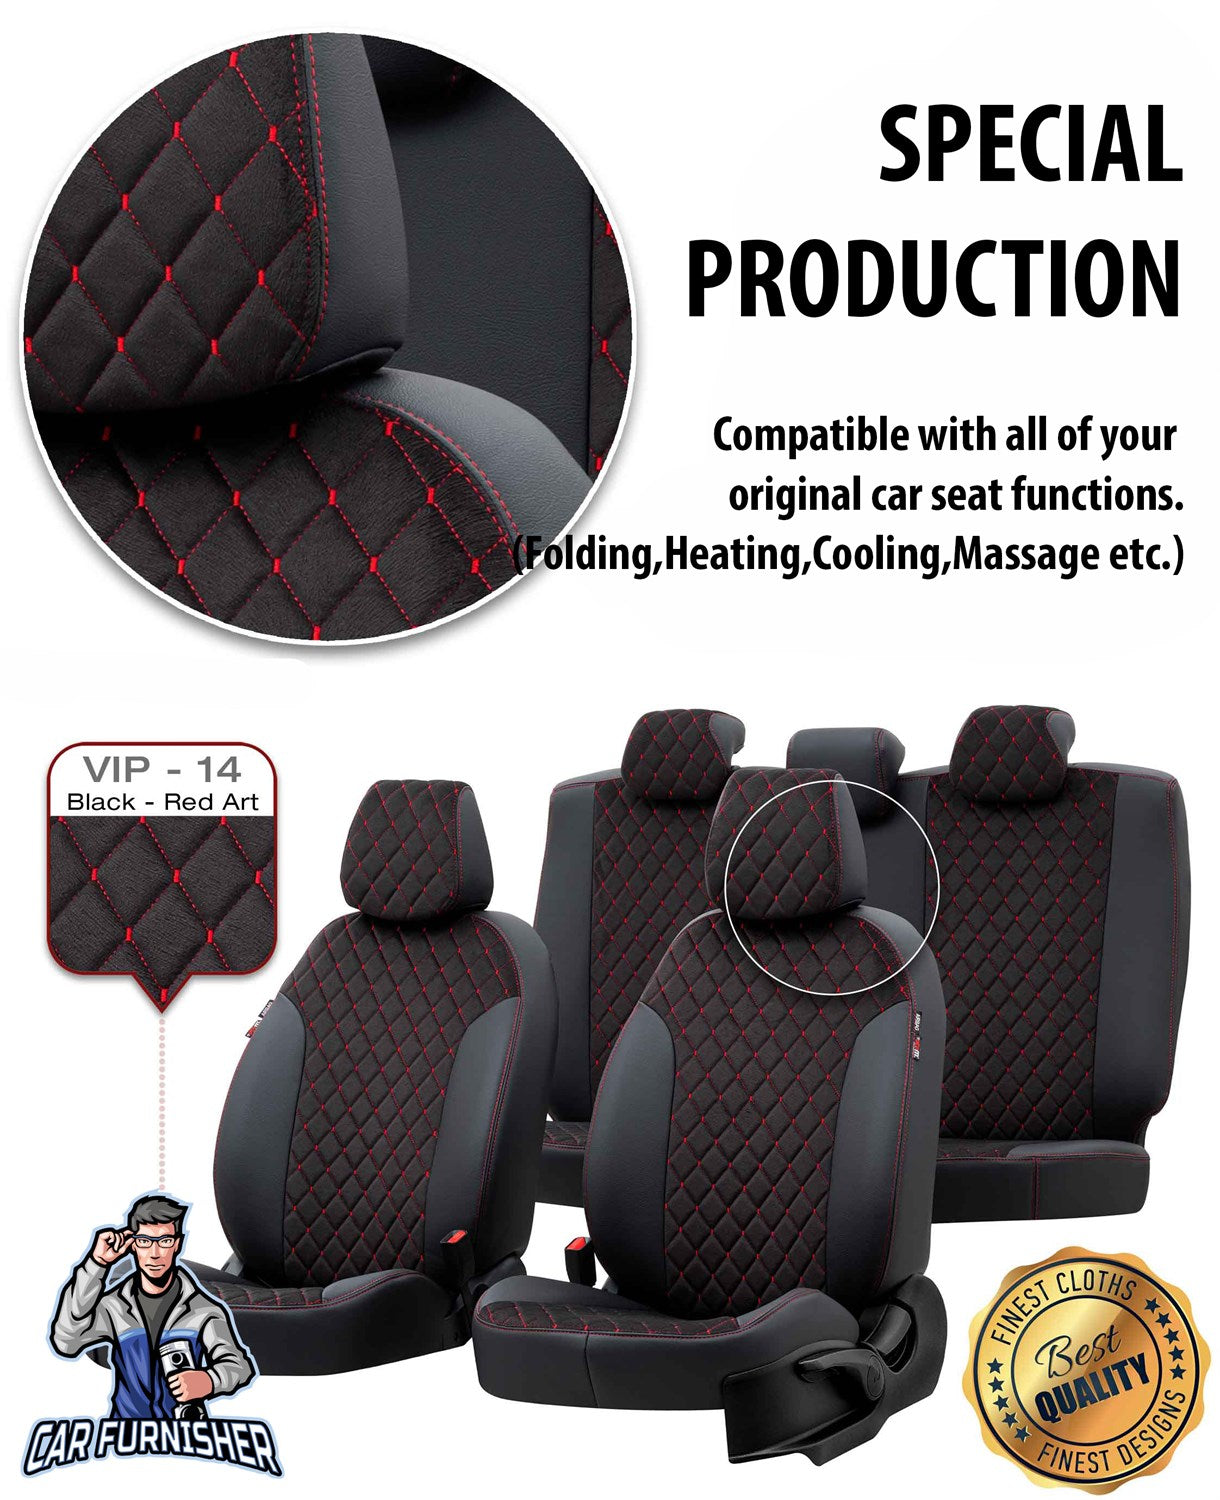 Mitsubishi Spacestar Seat Cover Madrid Foal Feather Design Red Leather & Foal Feather